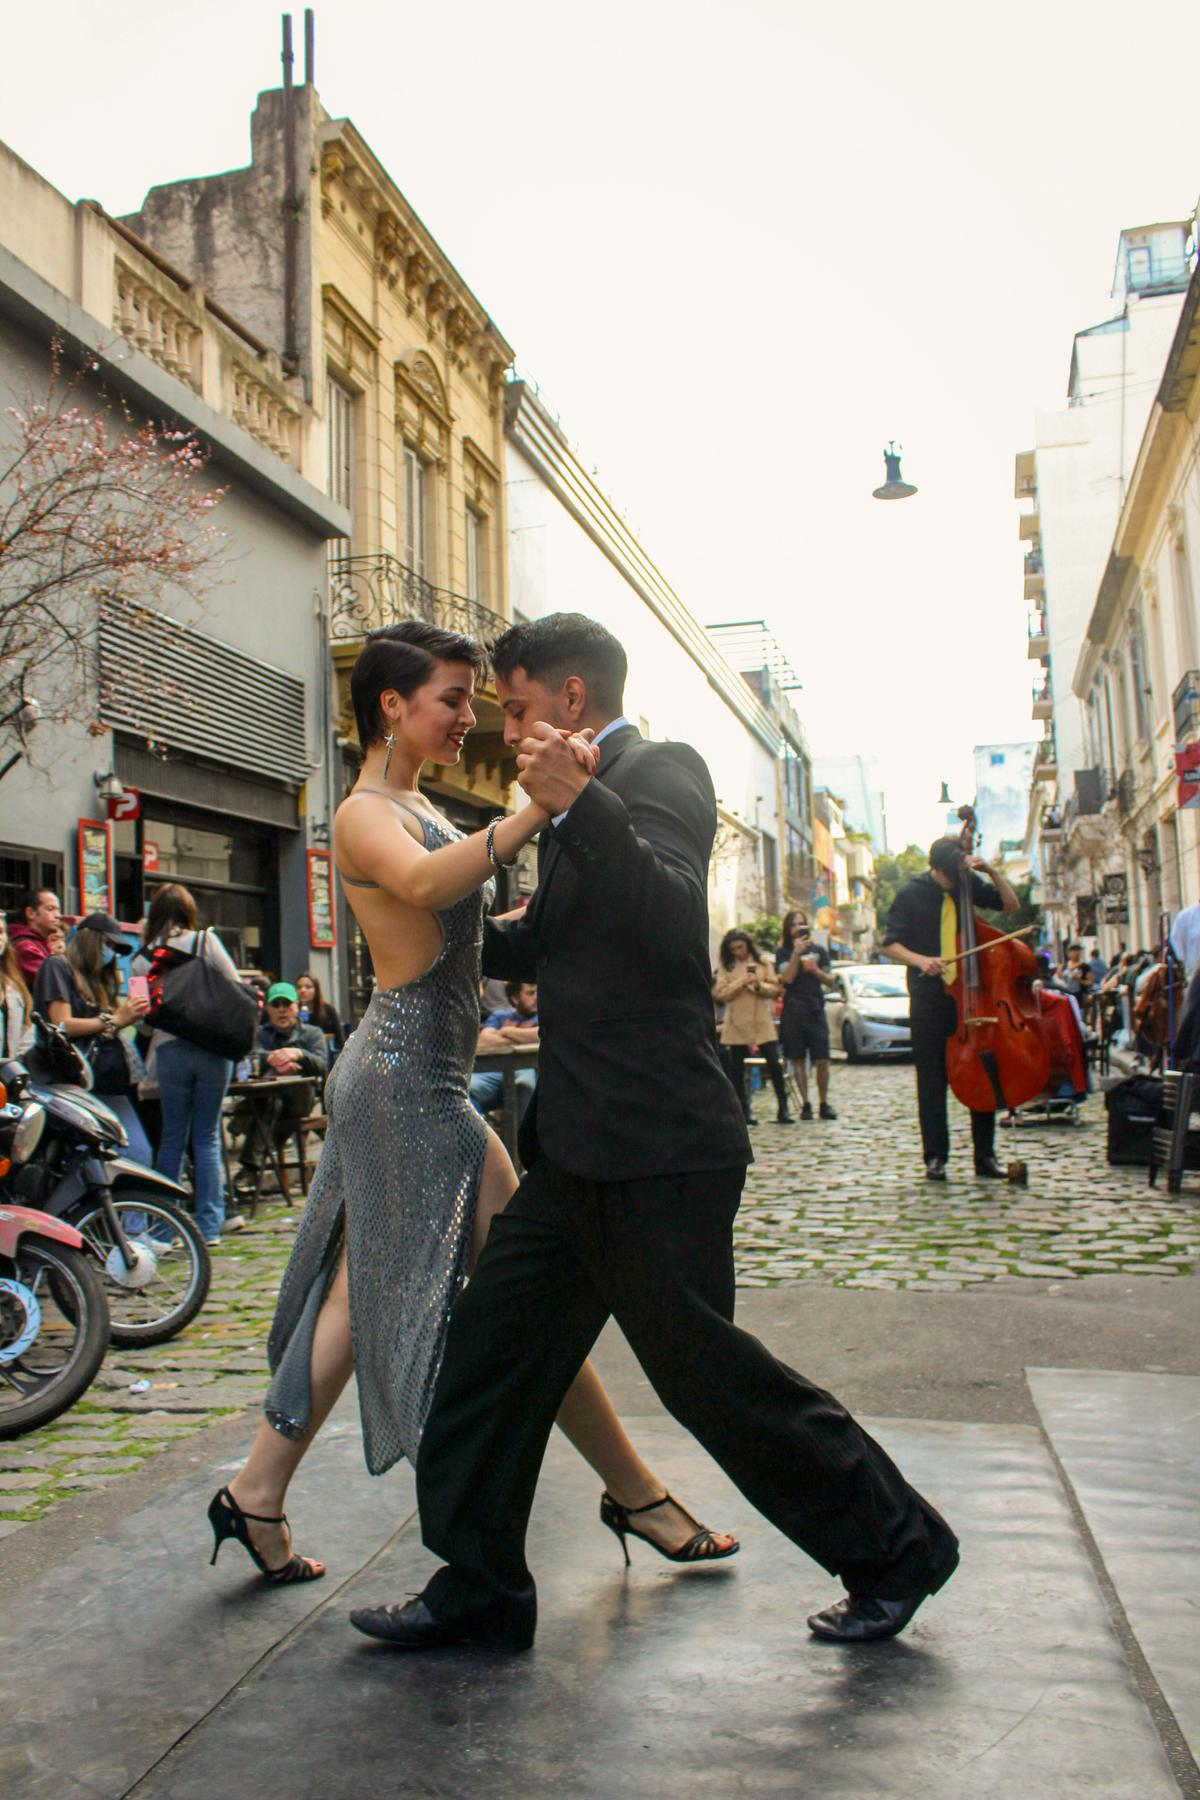 Tango performers in Buenos Aires often teach dance lessons to beginners. (Sol Pinto/Pexels)